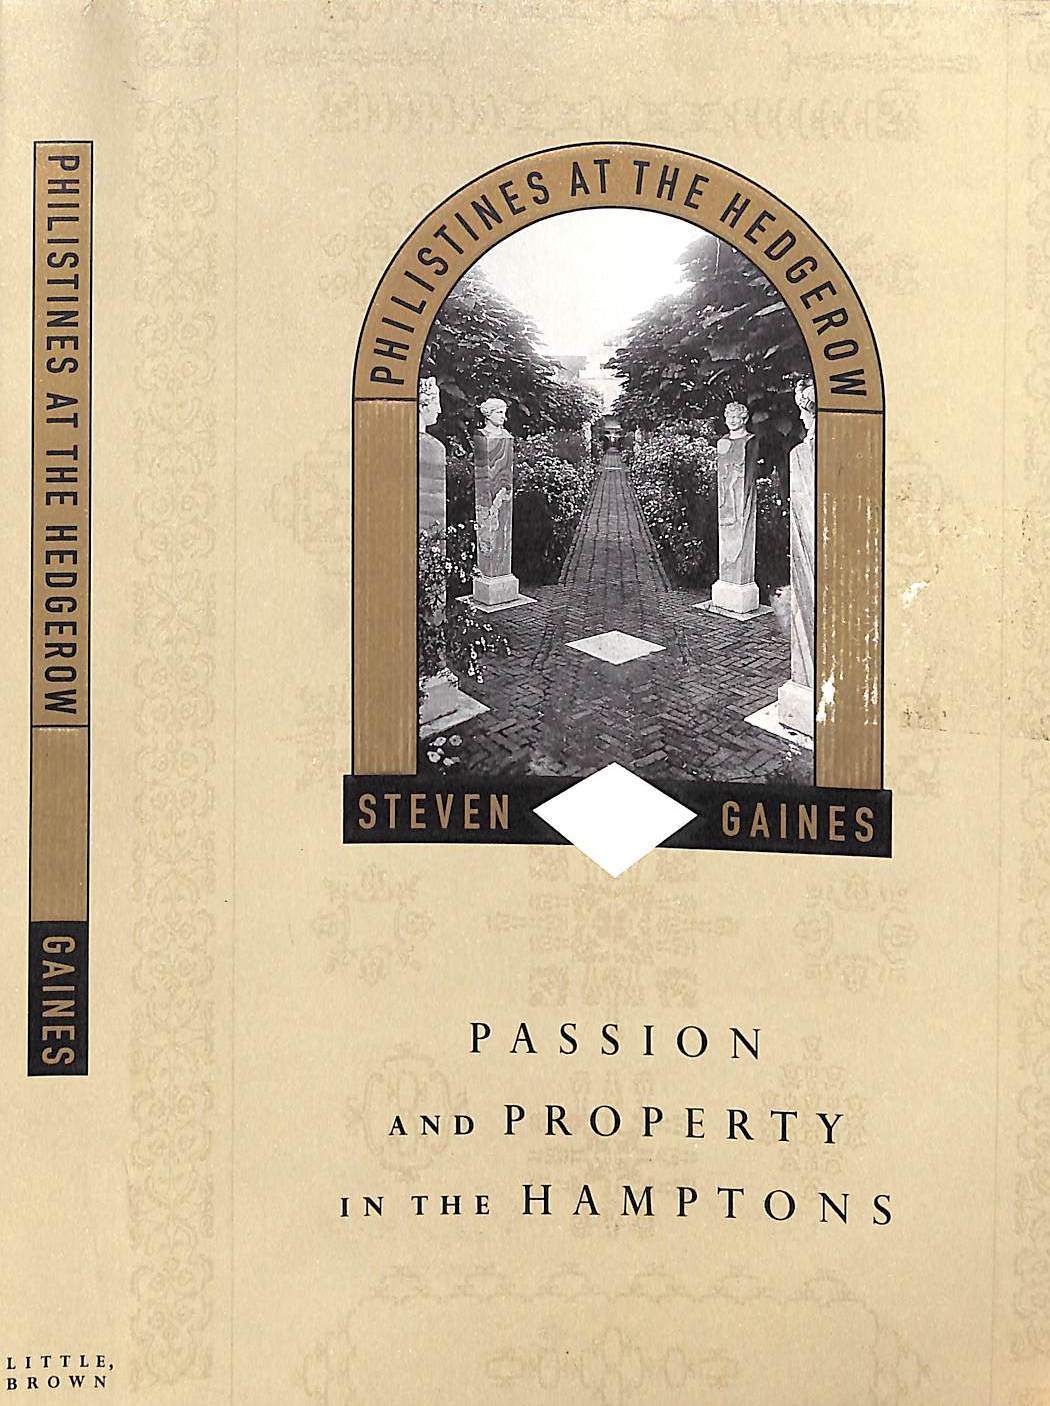 "Philistines At The Hedgerow: Passion And Property In The Hamptons" 1998 GAINES, Steven